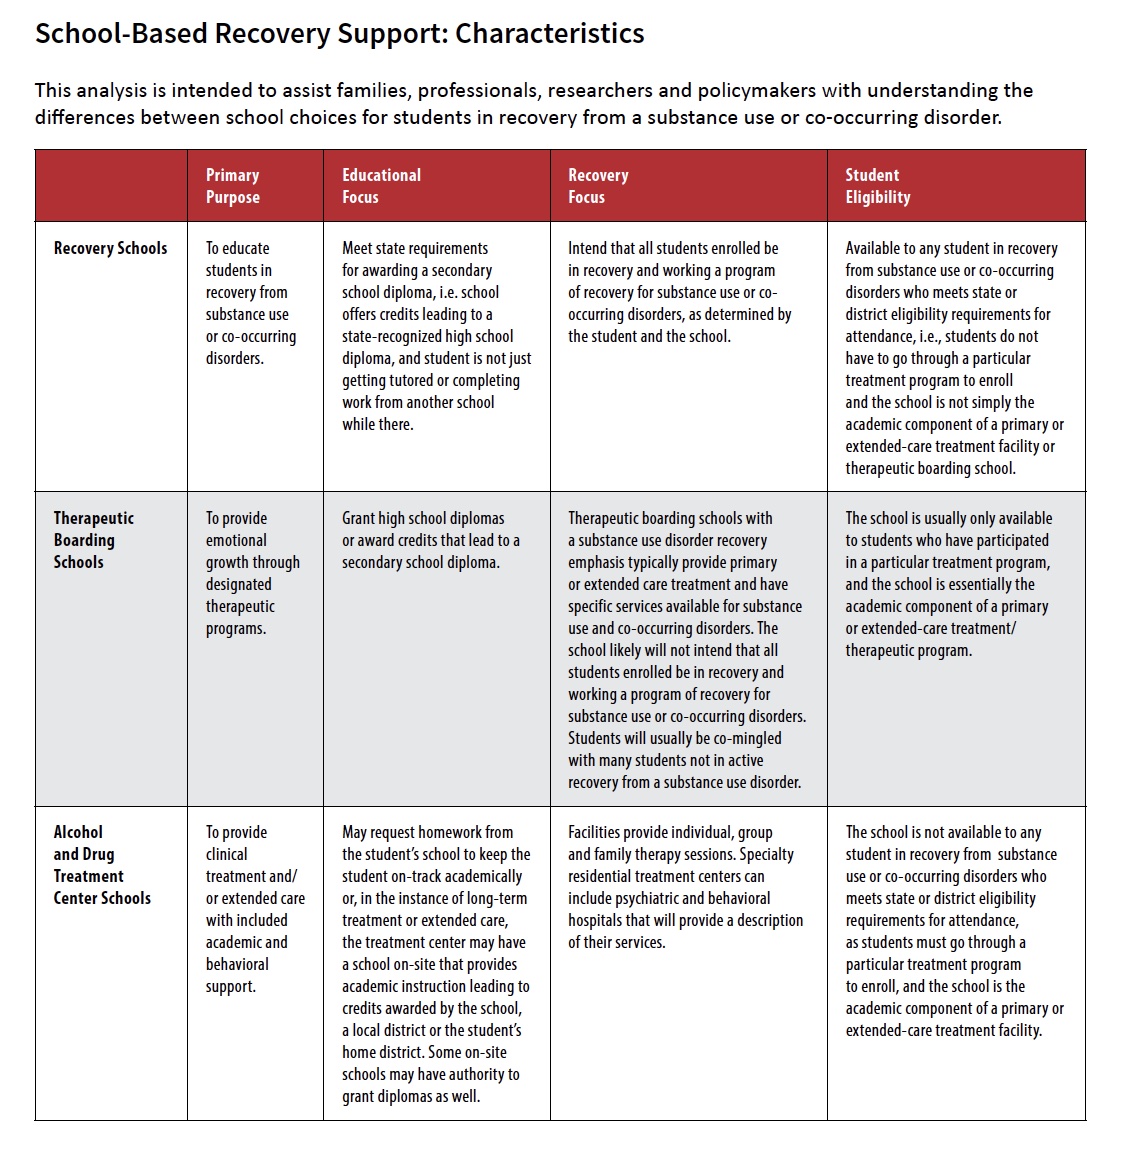 School-Based Recovery Support